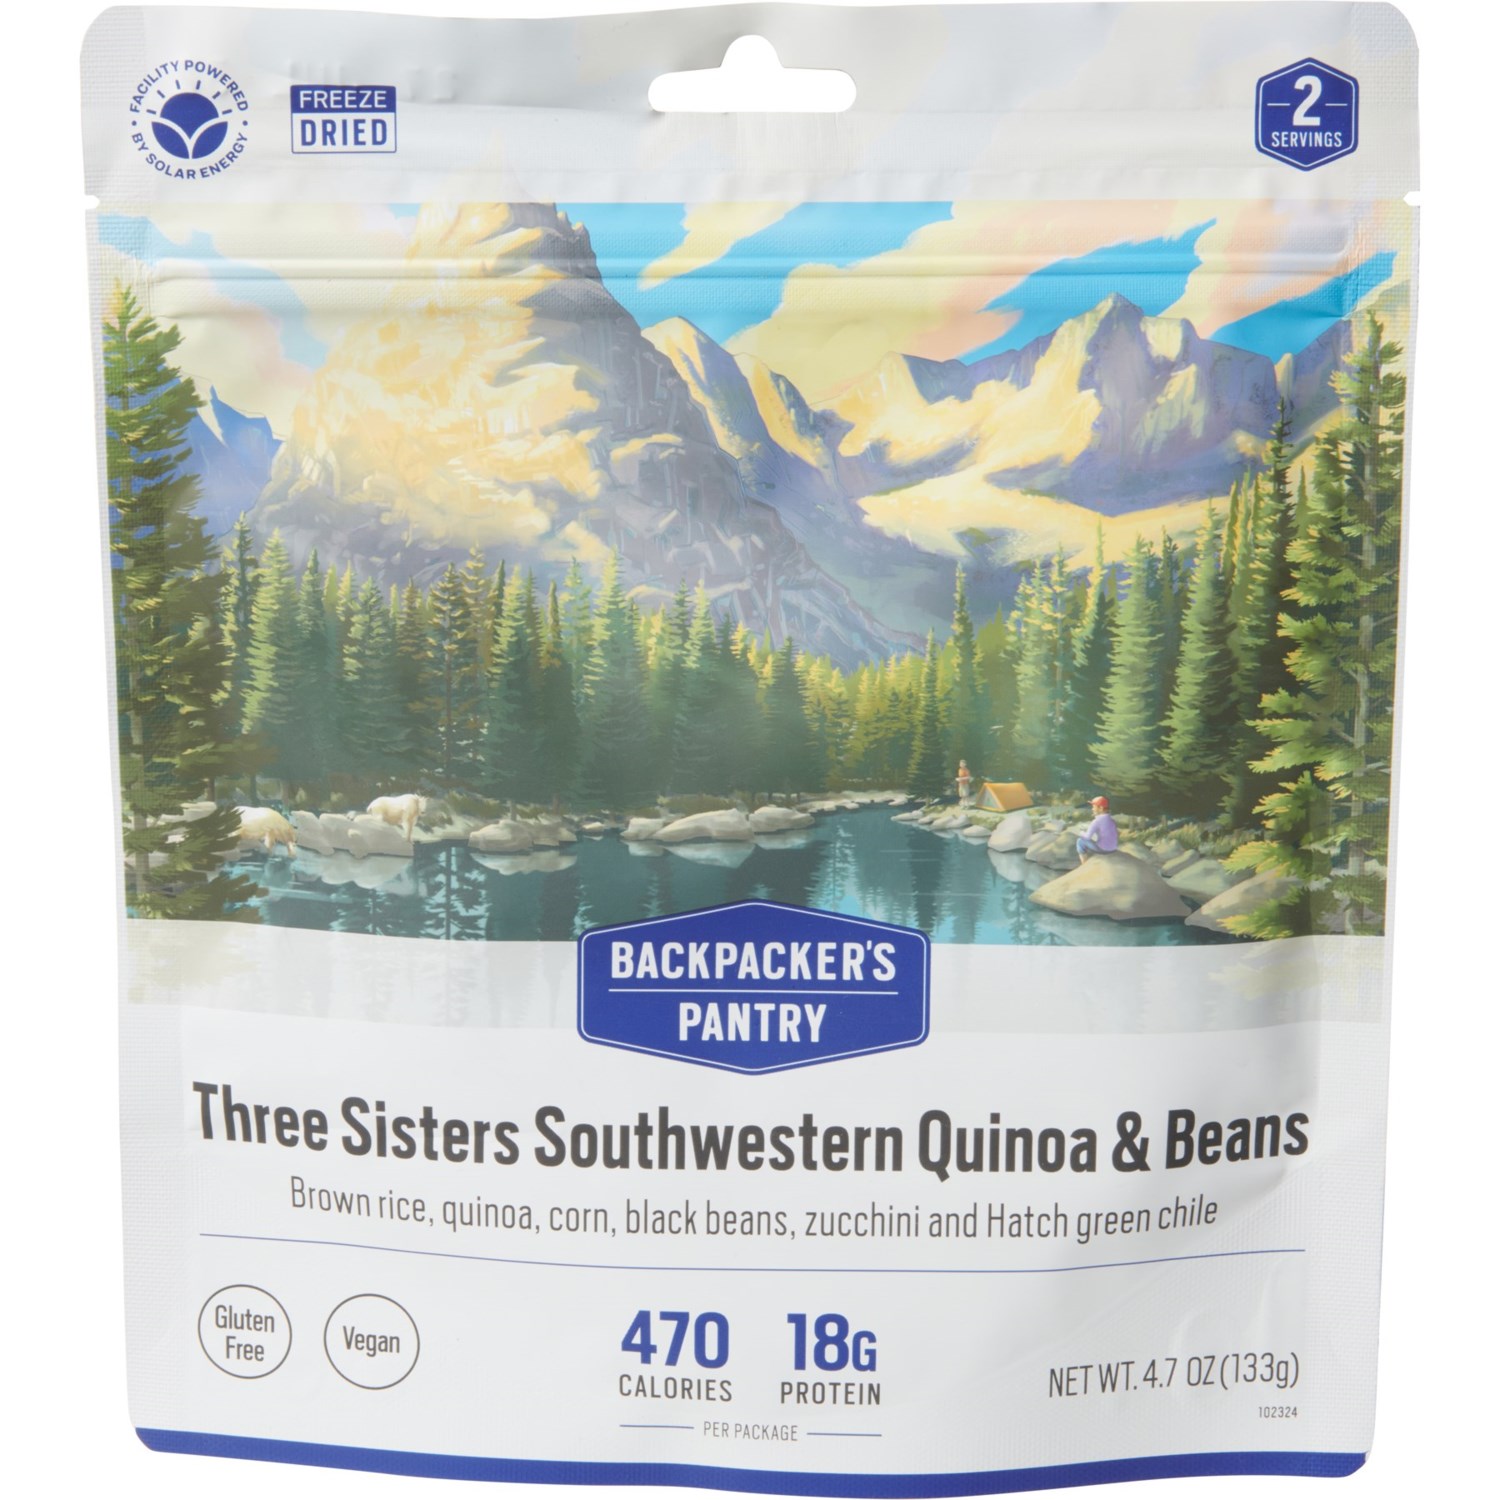 Backpackers Pantry Three Sisters Southwestern Quinoa and Beans - 2 Servings